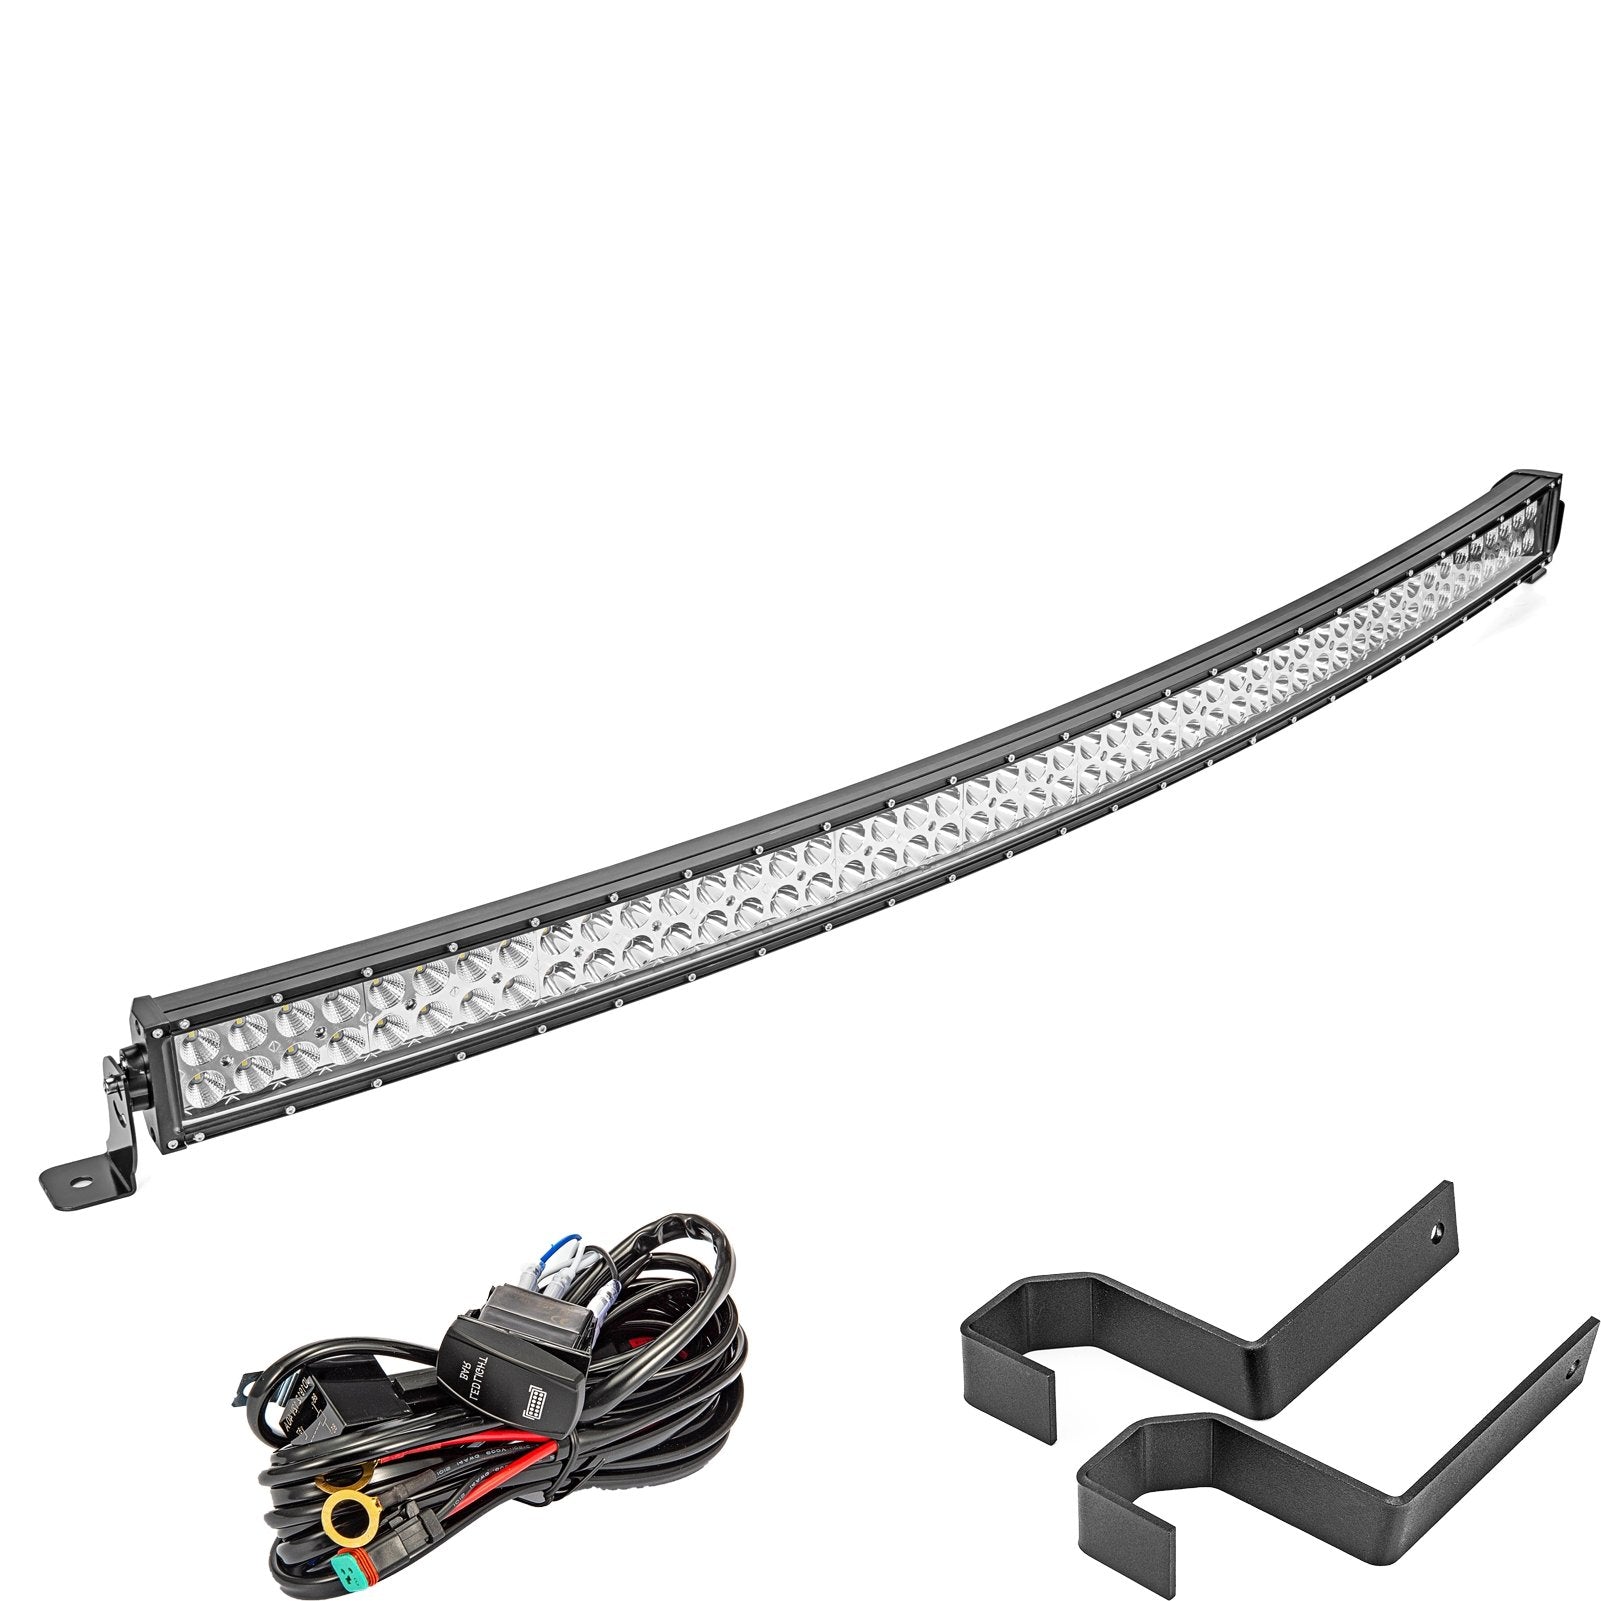 2016-2023 Can Am Defender 500 800 1000 Max Roof 52" Curved LED Light Bar Mount Kit - Weisen